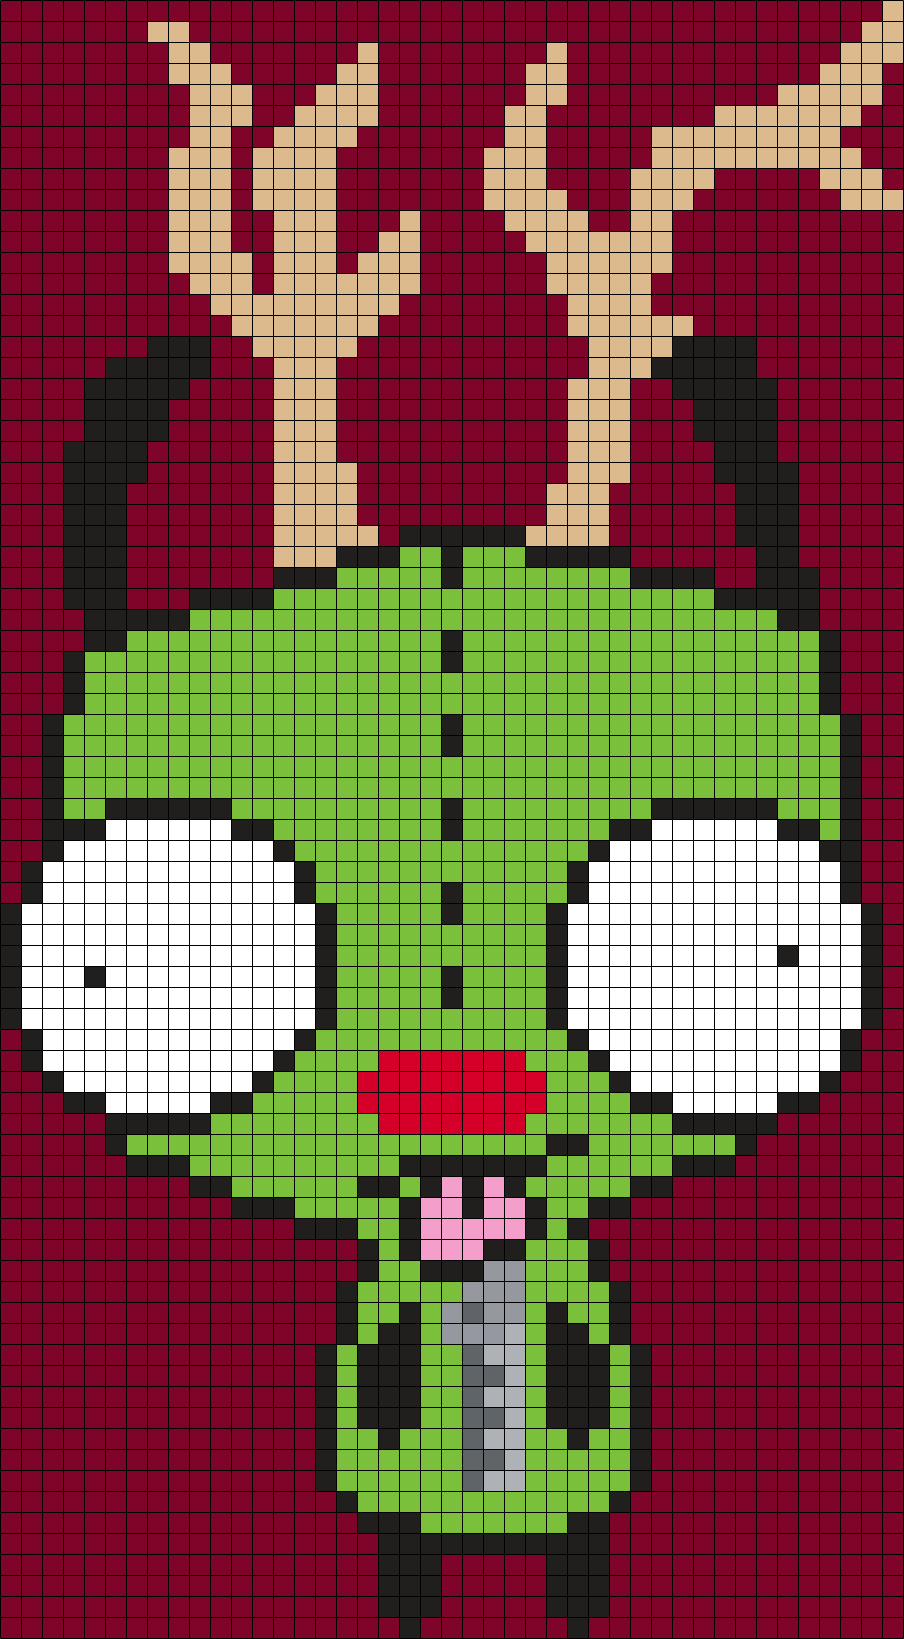 Gir As Rudolph The Red Nosed Reindeer From Invader Zim  (Square)